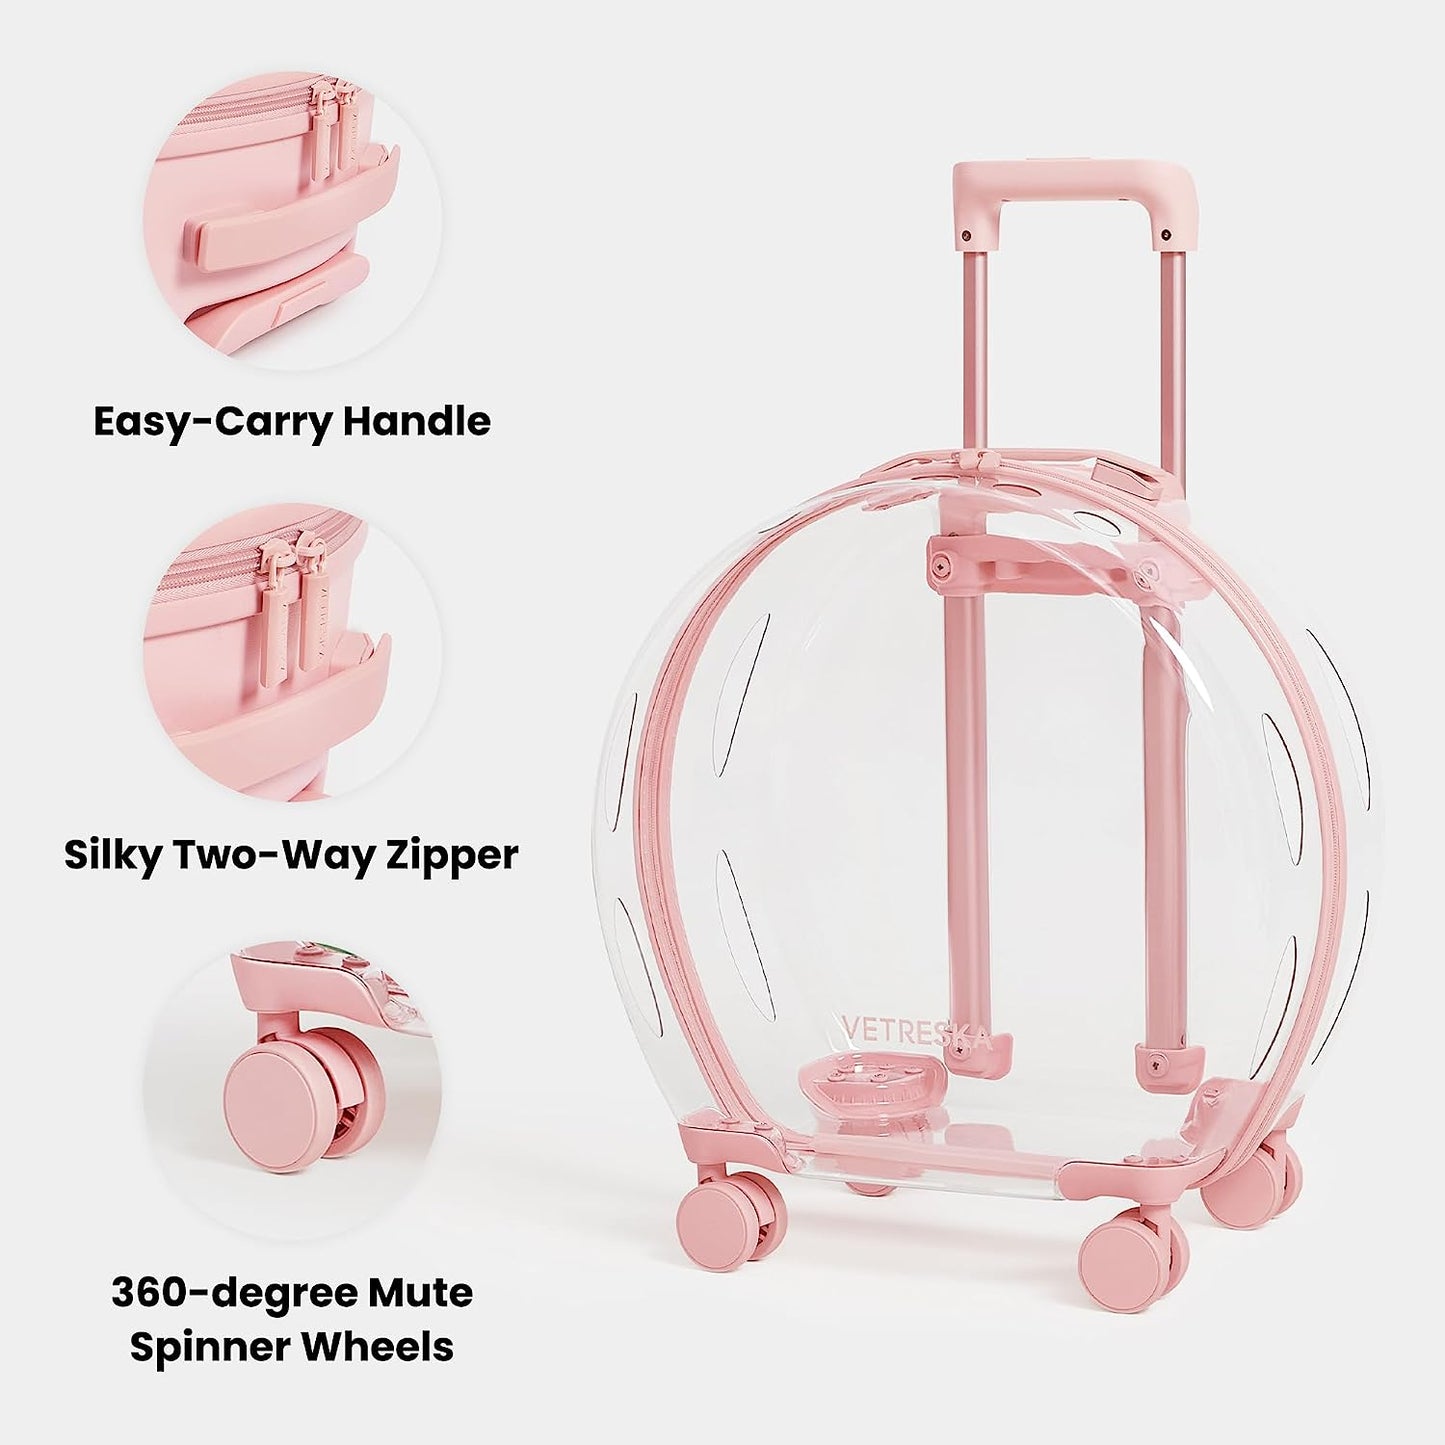 Pet Carrier with 2 Mats, Pink Pet Transport Luggage with Wheels and Telescopic Handle, Pet Travel Carrier for Small & Medium Dogs/Cats